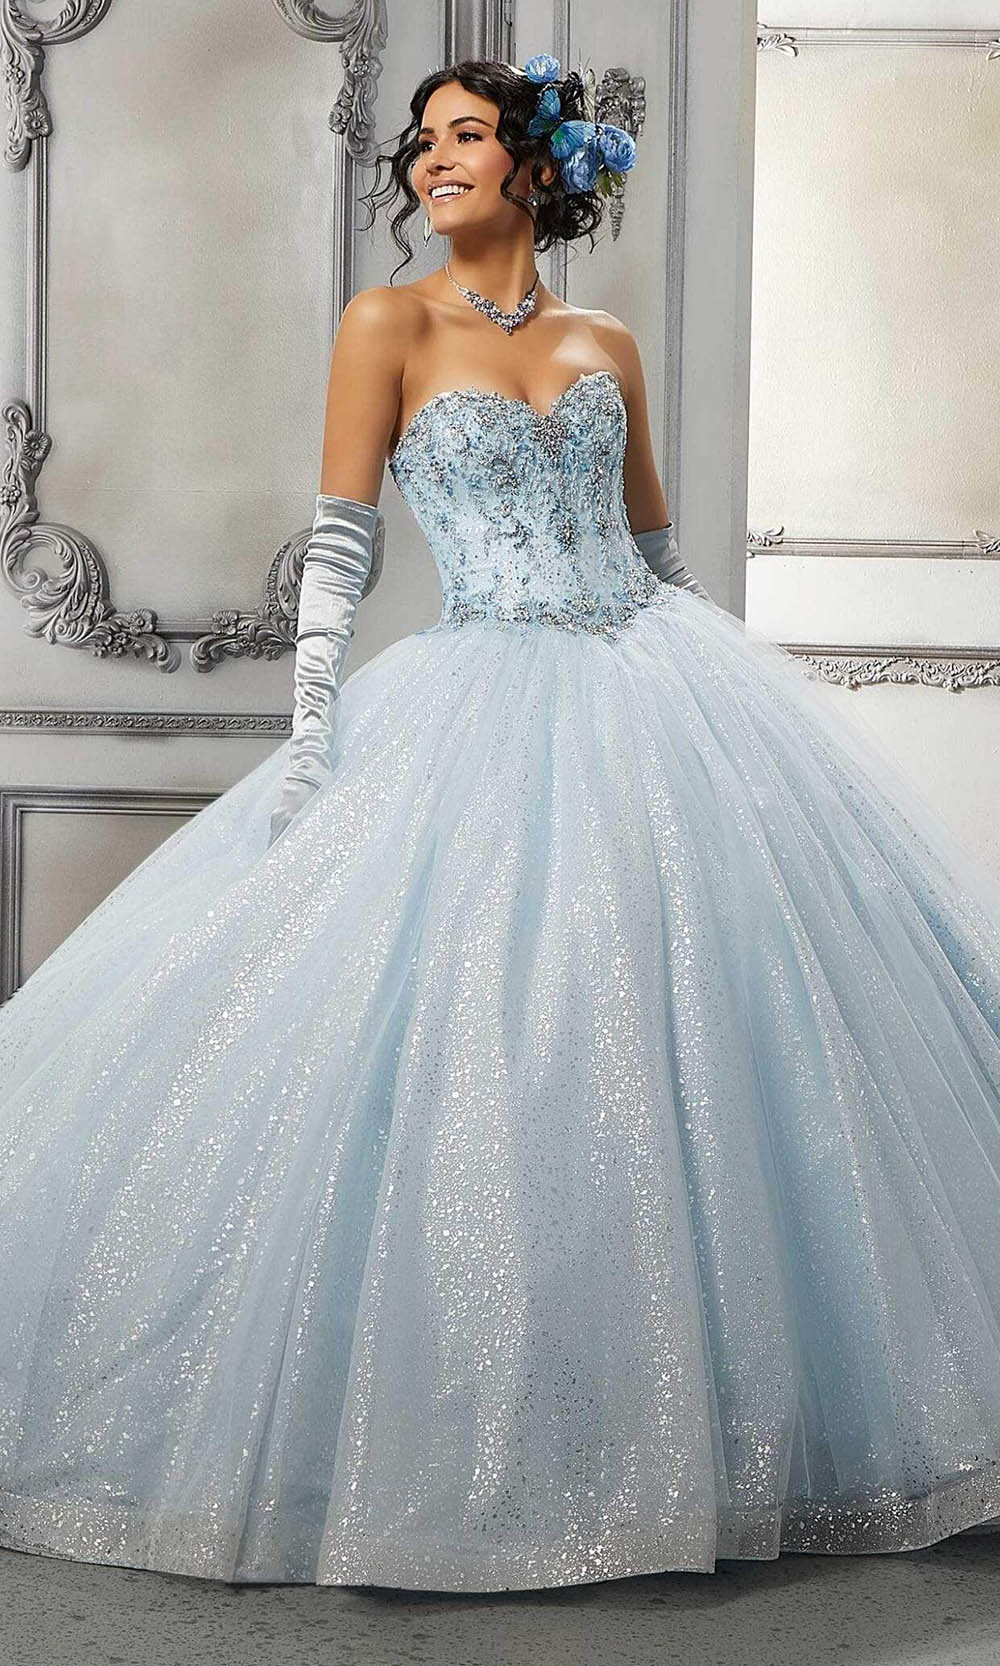 Vizcaya by Mori Lee - 60142 Sweetheart Basque Ball Gown Quinceanera Dresses 00 / Light Blue